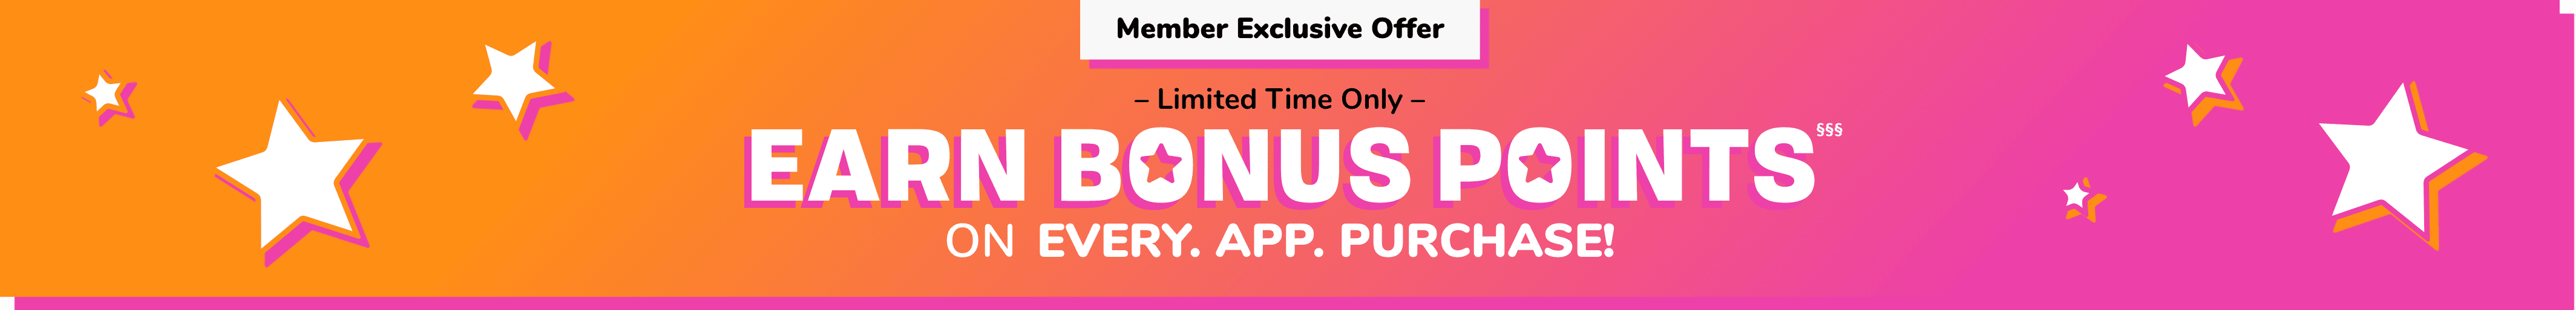 Member Exclusive. Limited time only. EARN POINTS ON EVERY. APP. PURCHASE 